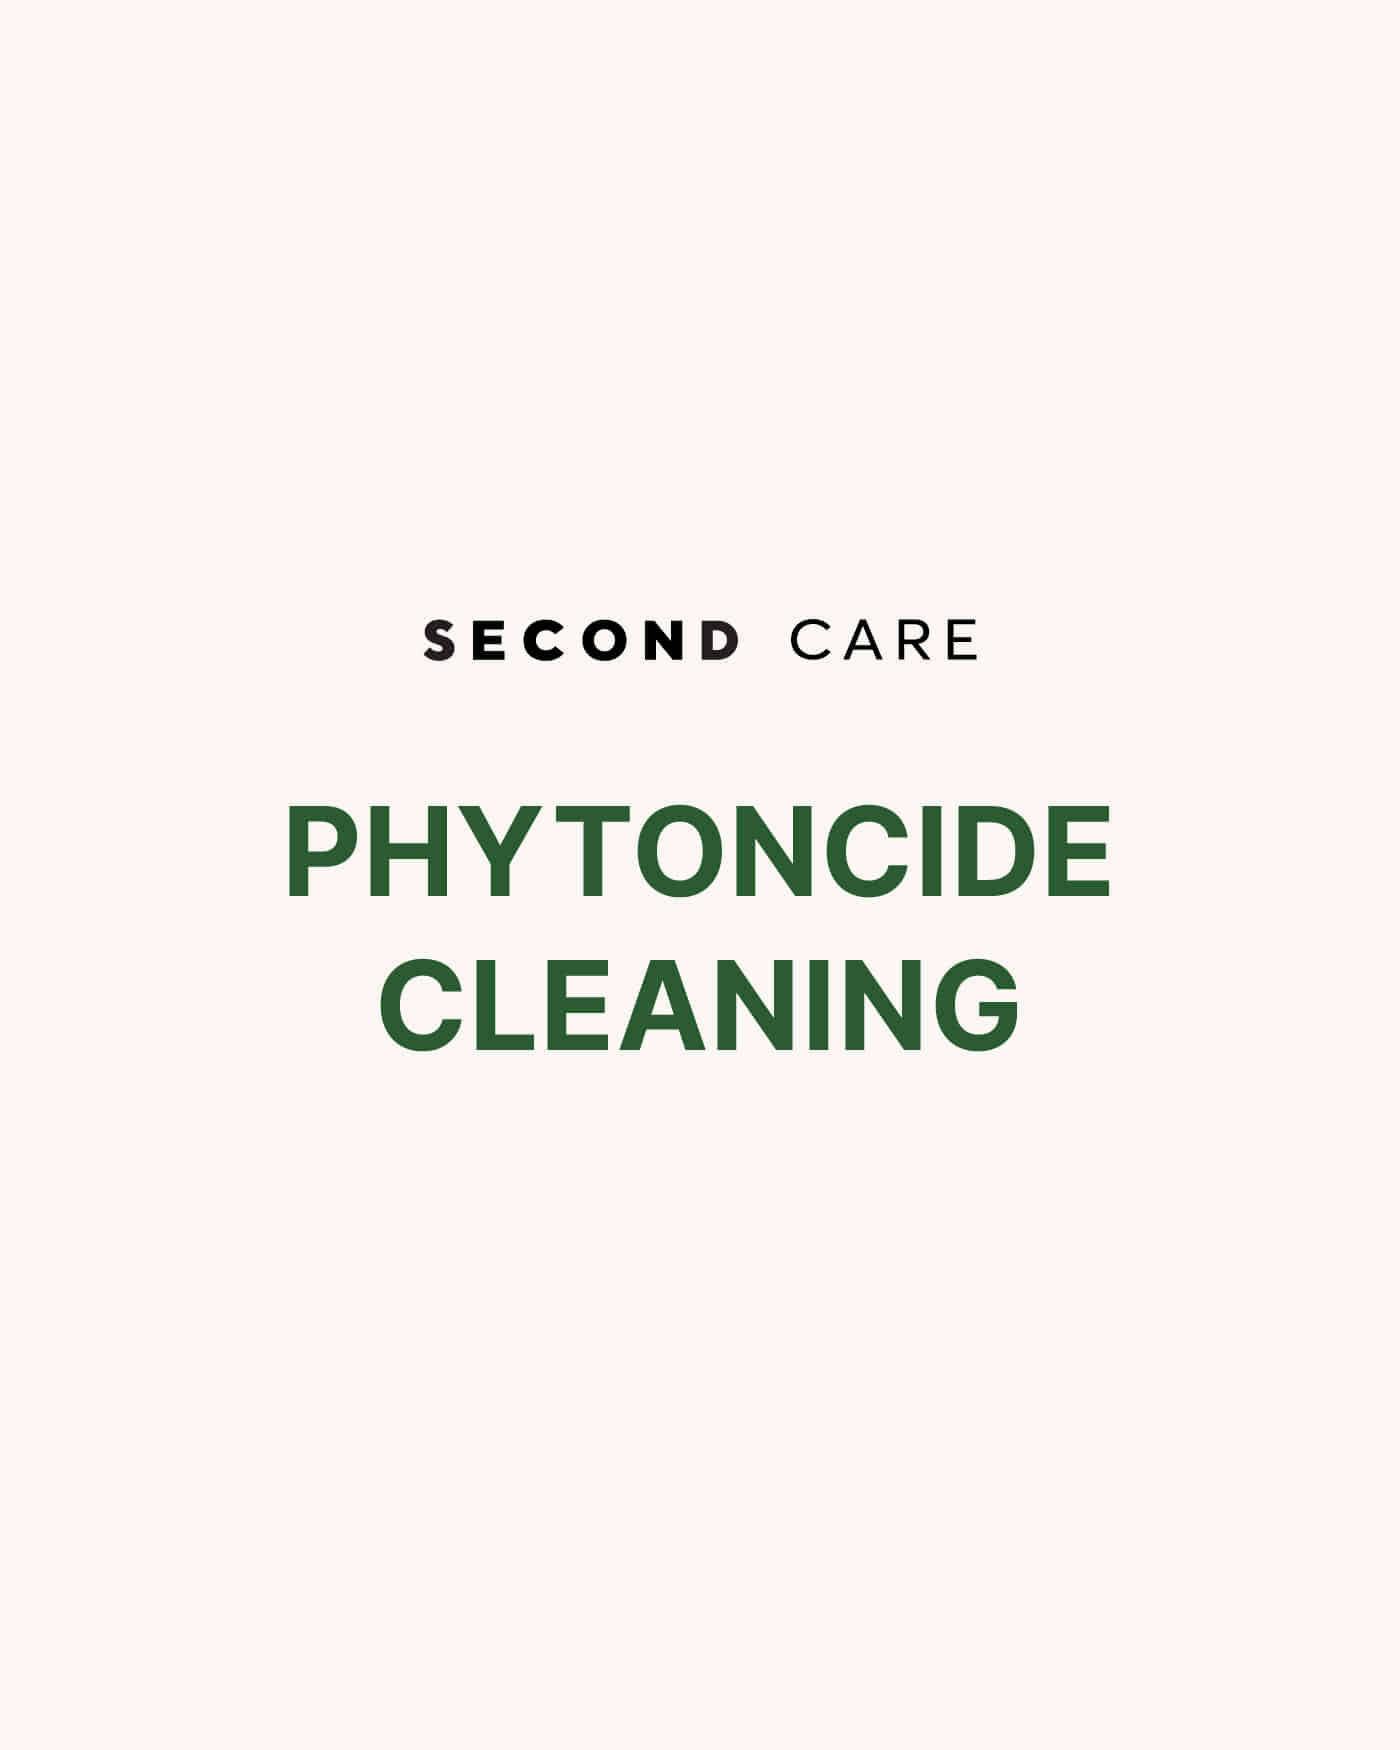 PHYTONCIDE CLEANING